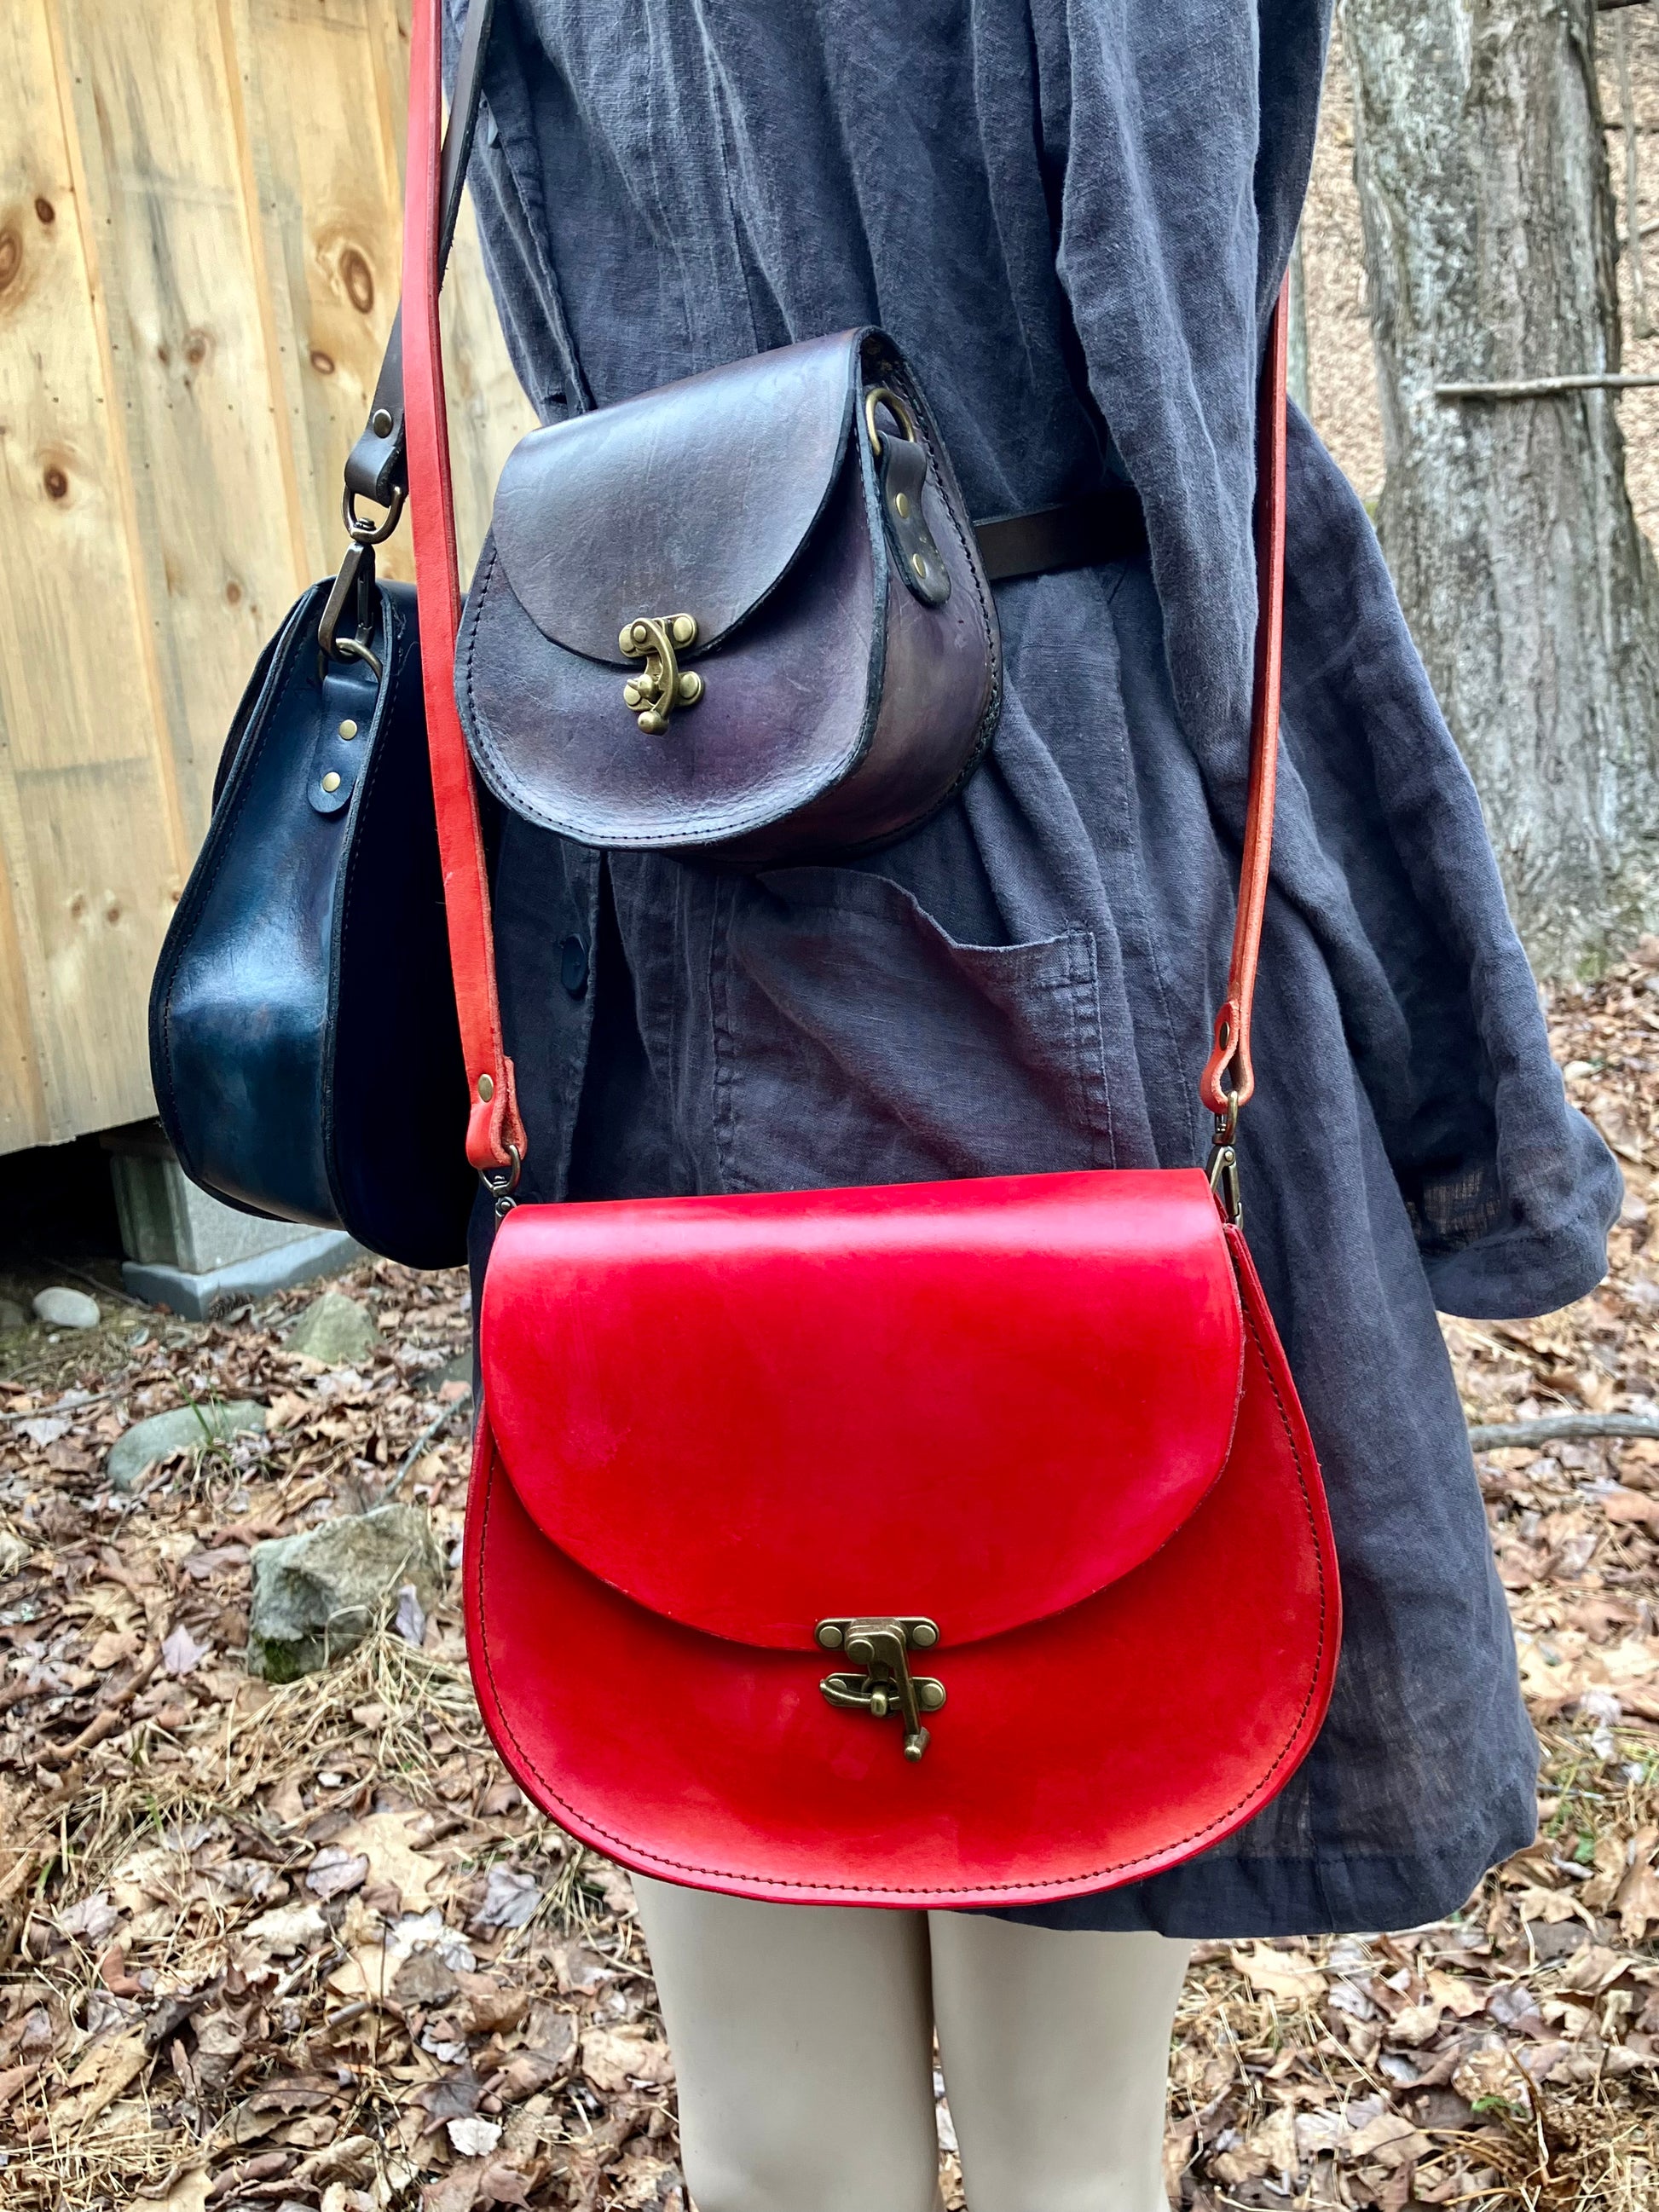 The Cheryl in red leather is the first of its kind. other bags (not red) shown for comparison. handmade by Wilder Leather in Woodstock, NY